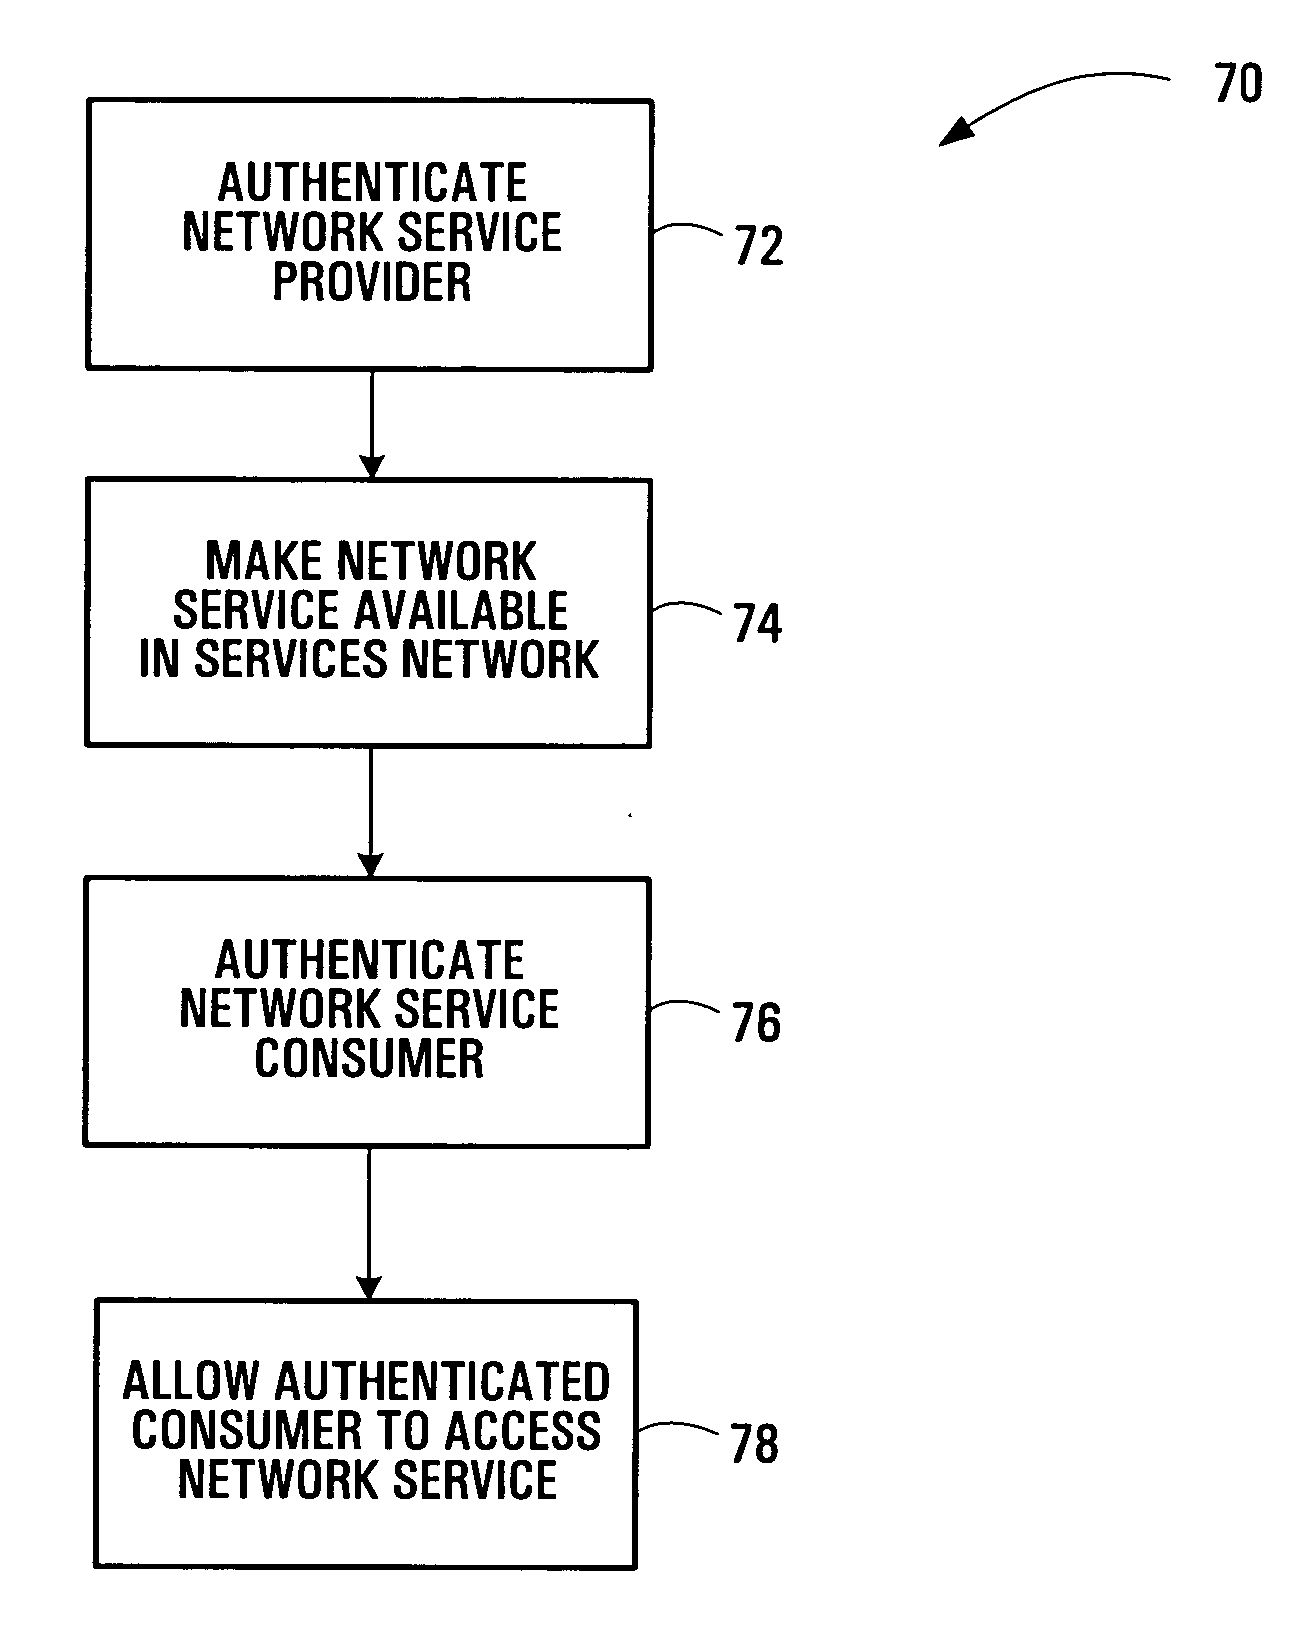 Network services infrastructure systems and methods